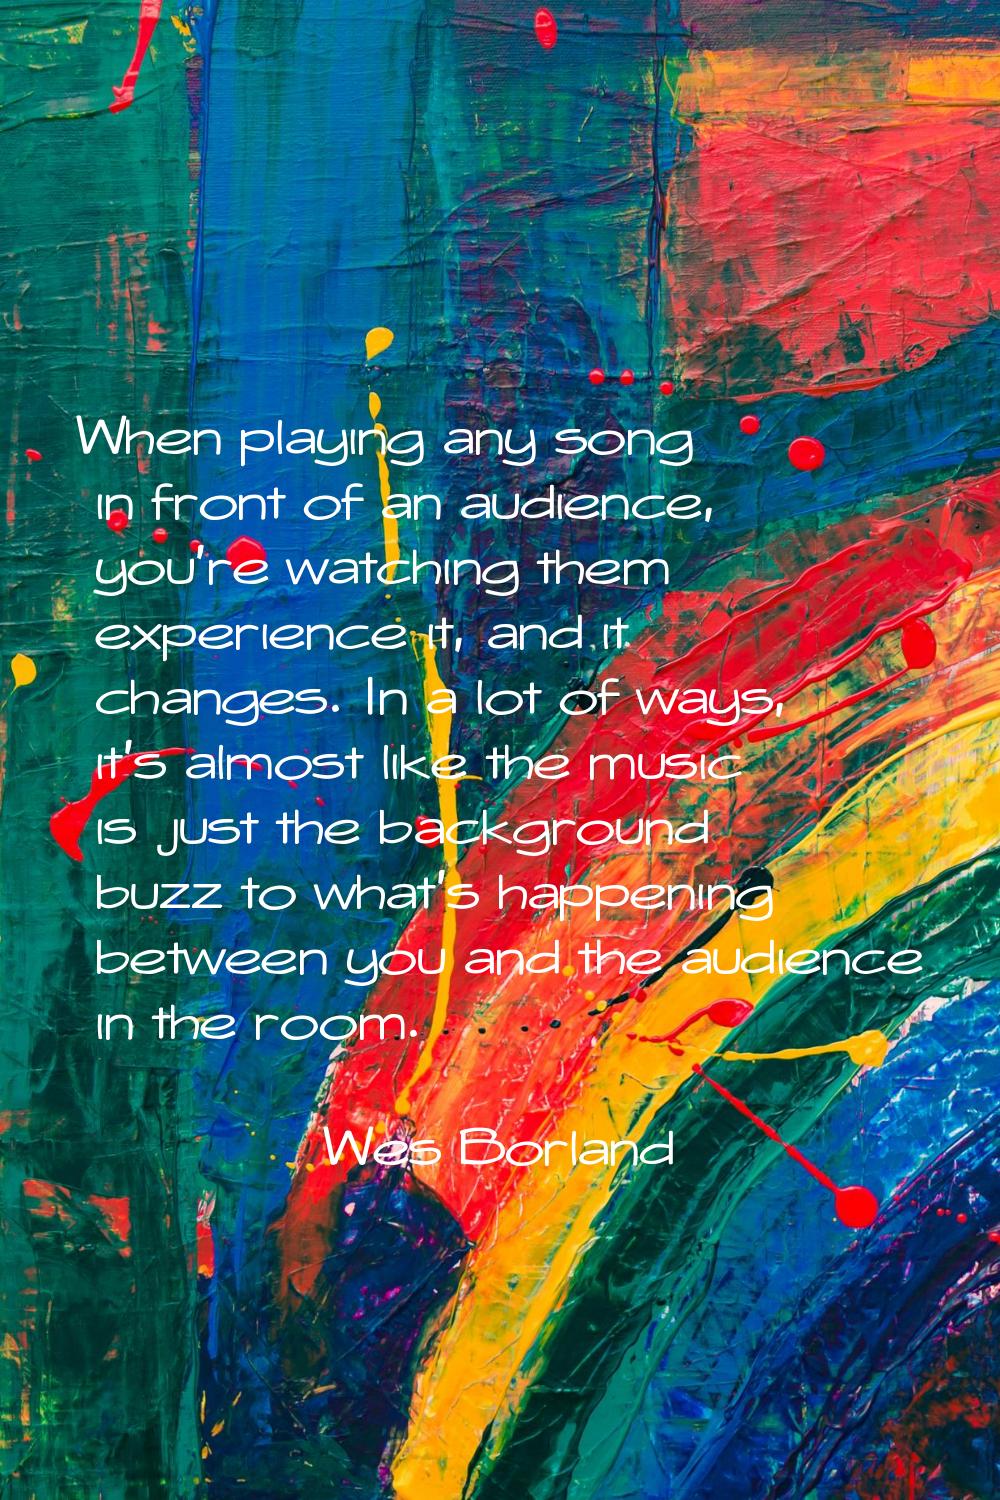 When playing any song in front of an audience, you're watching them experience it, and it changes. 